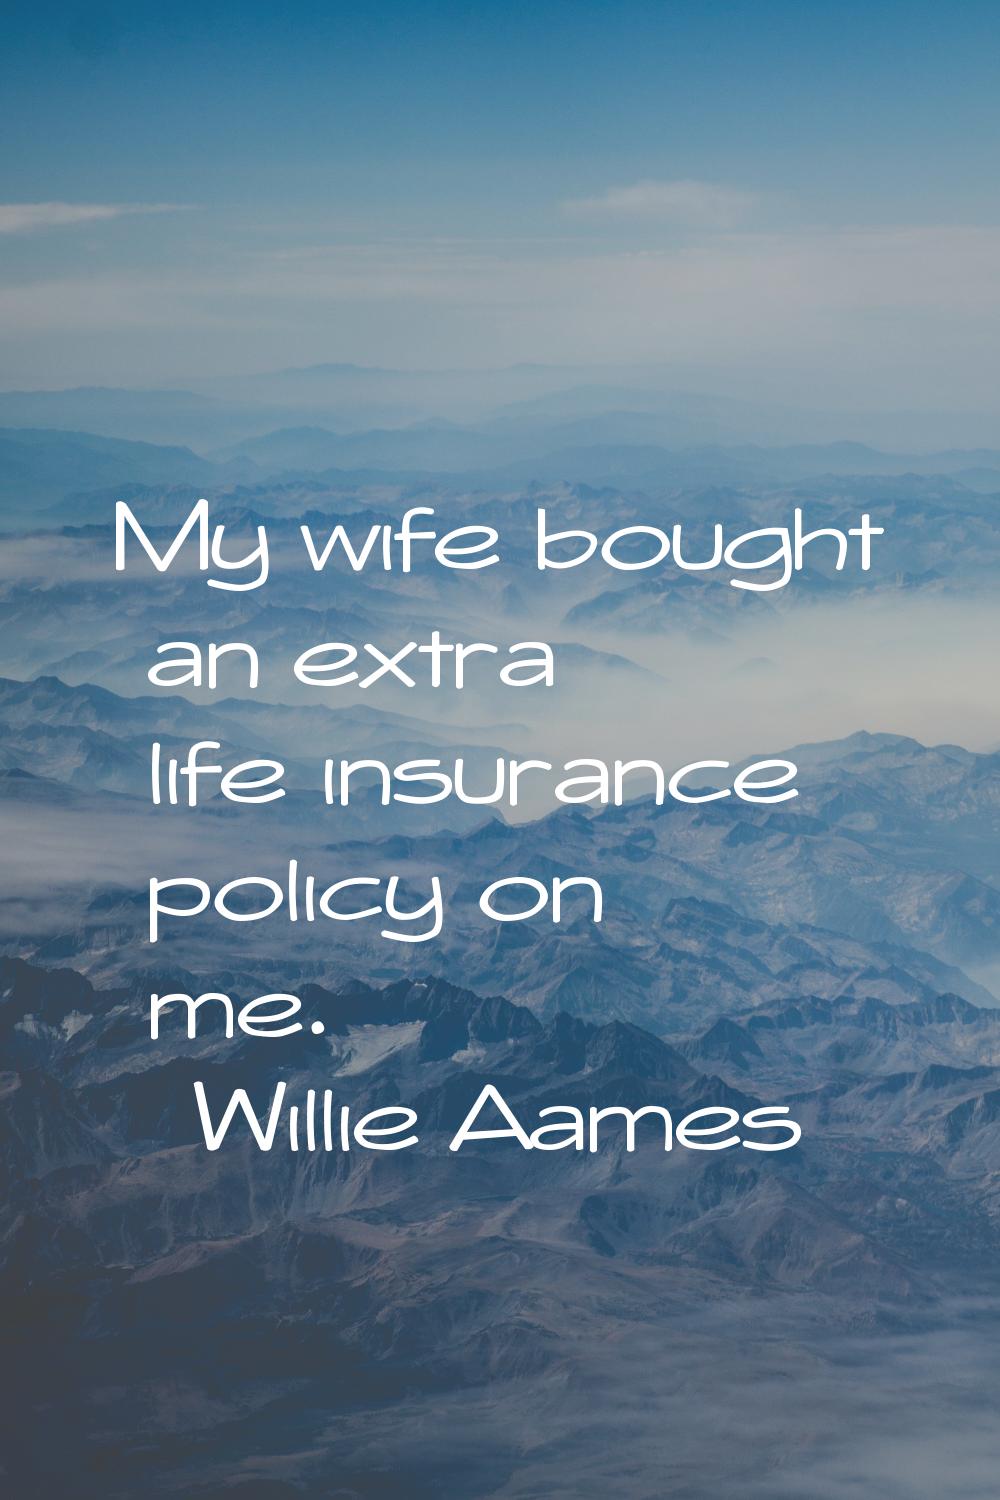 My wife bought an extra life insurance policy on me.